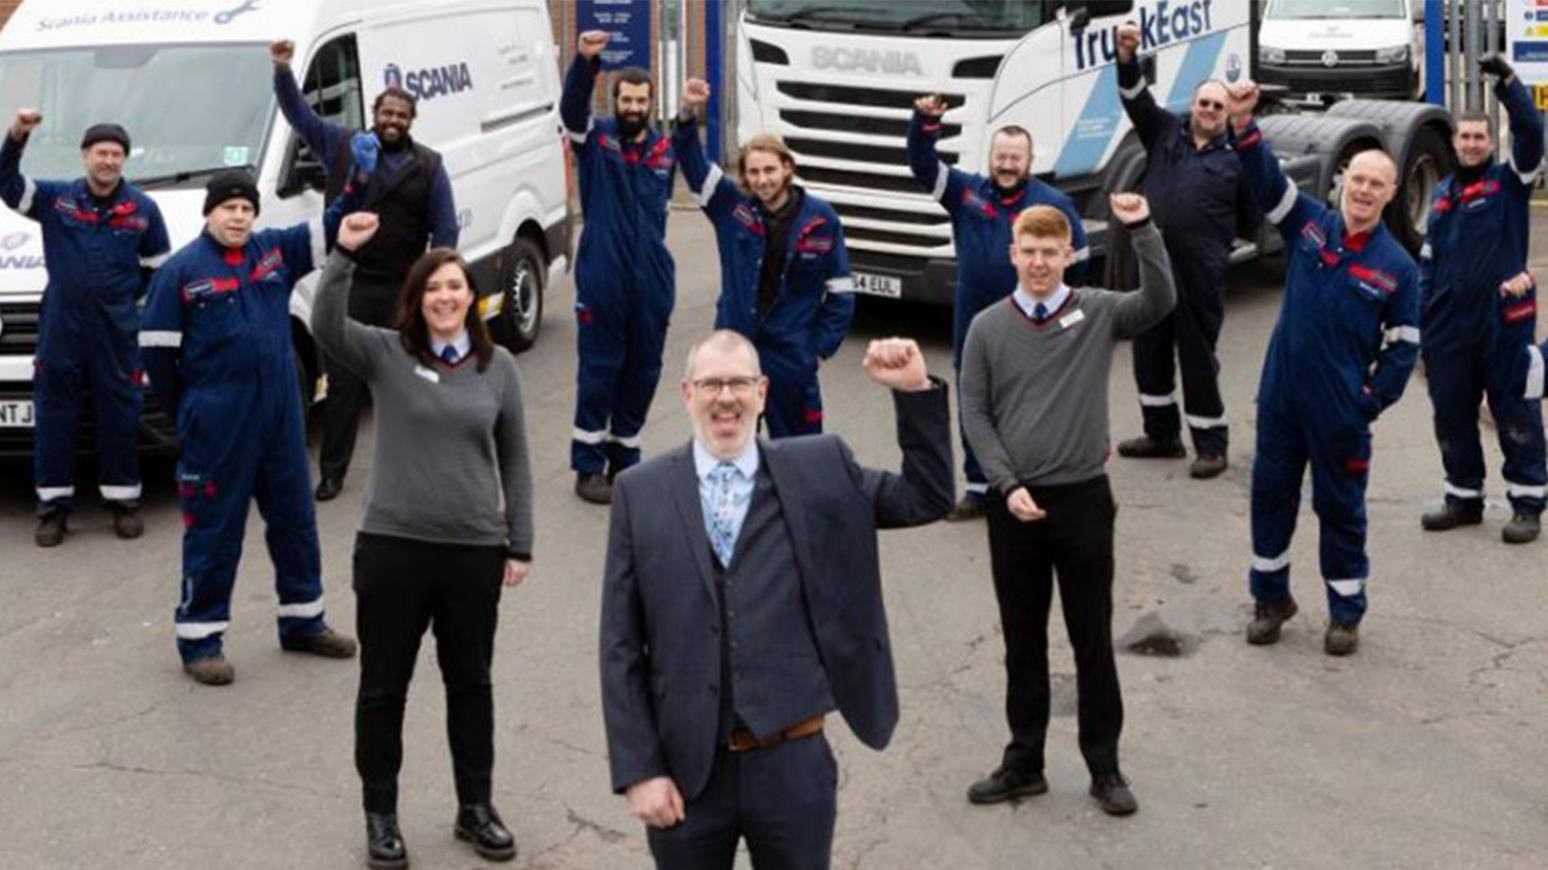 TruckEast Norwich Named 2020 Scania Depot Of The Year, Its Second Win In Three Years